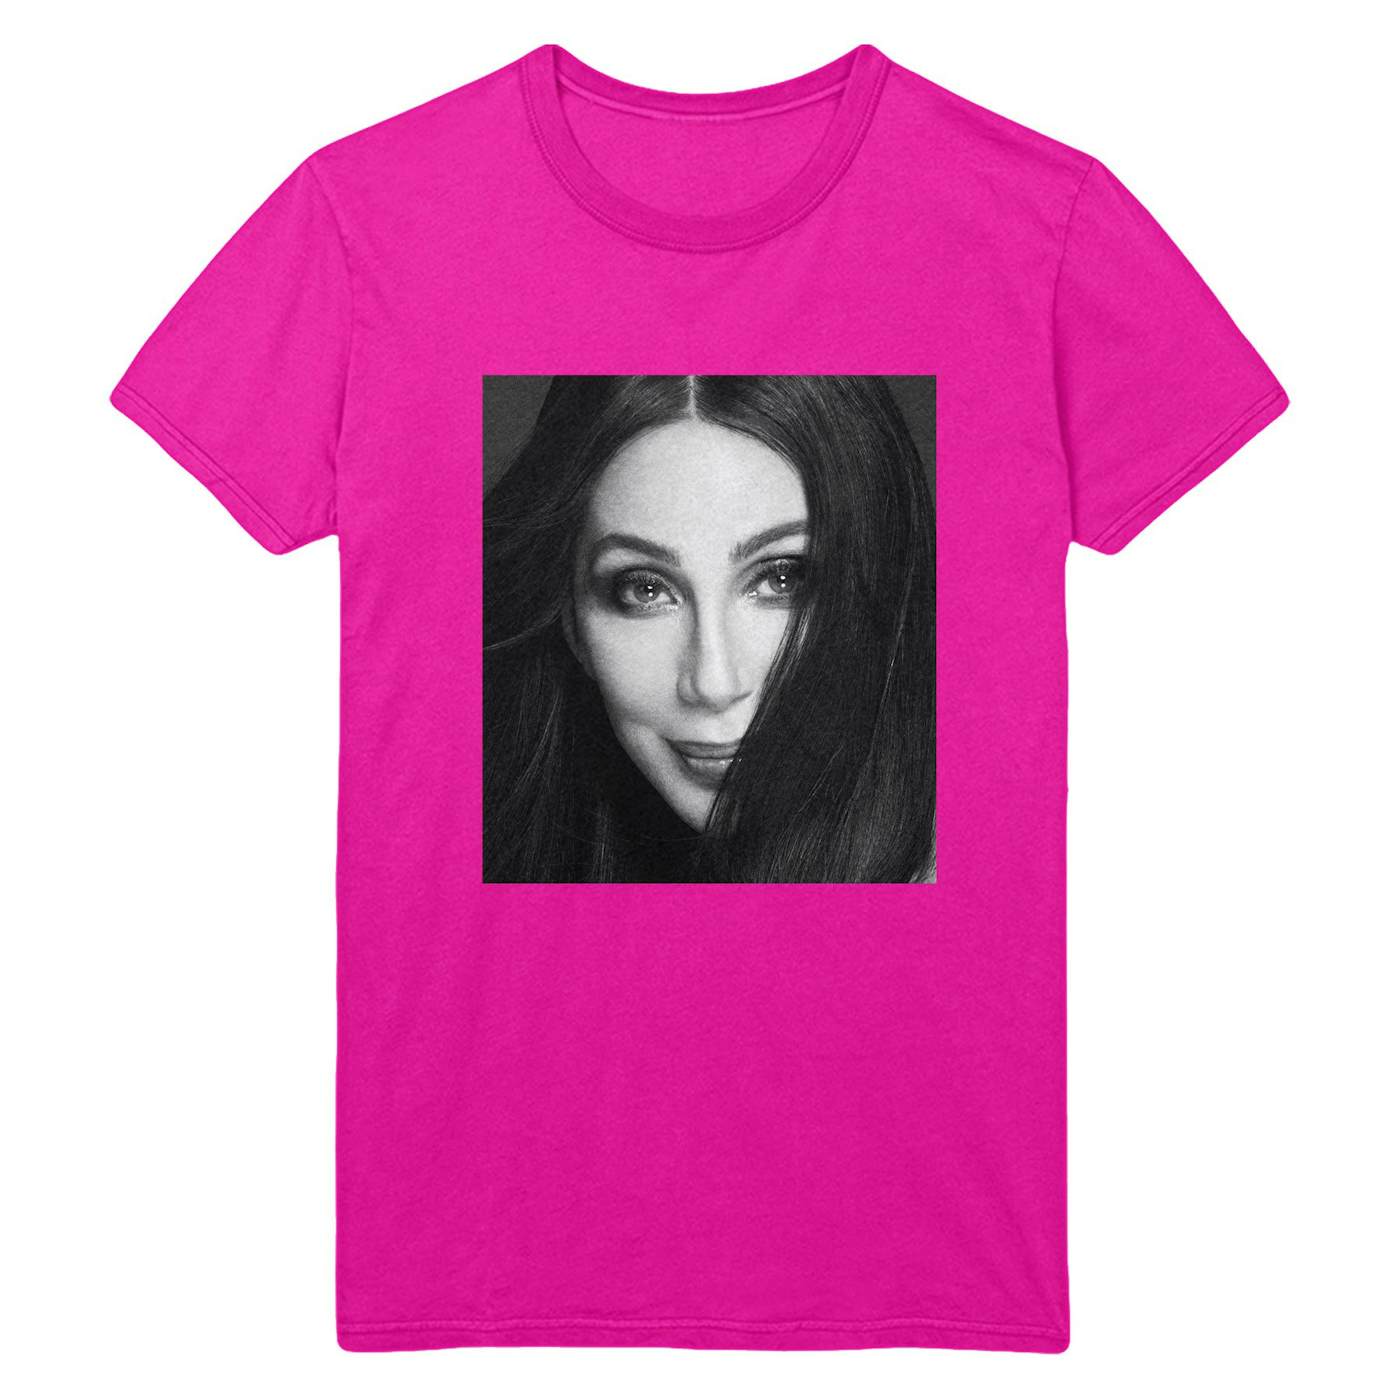 Cher Boxed Photo Tee